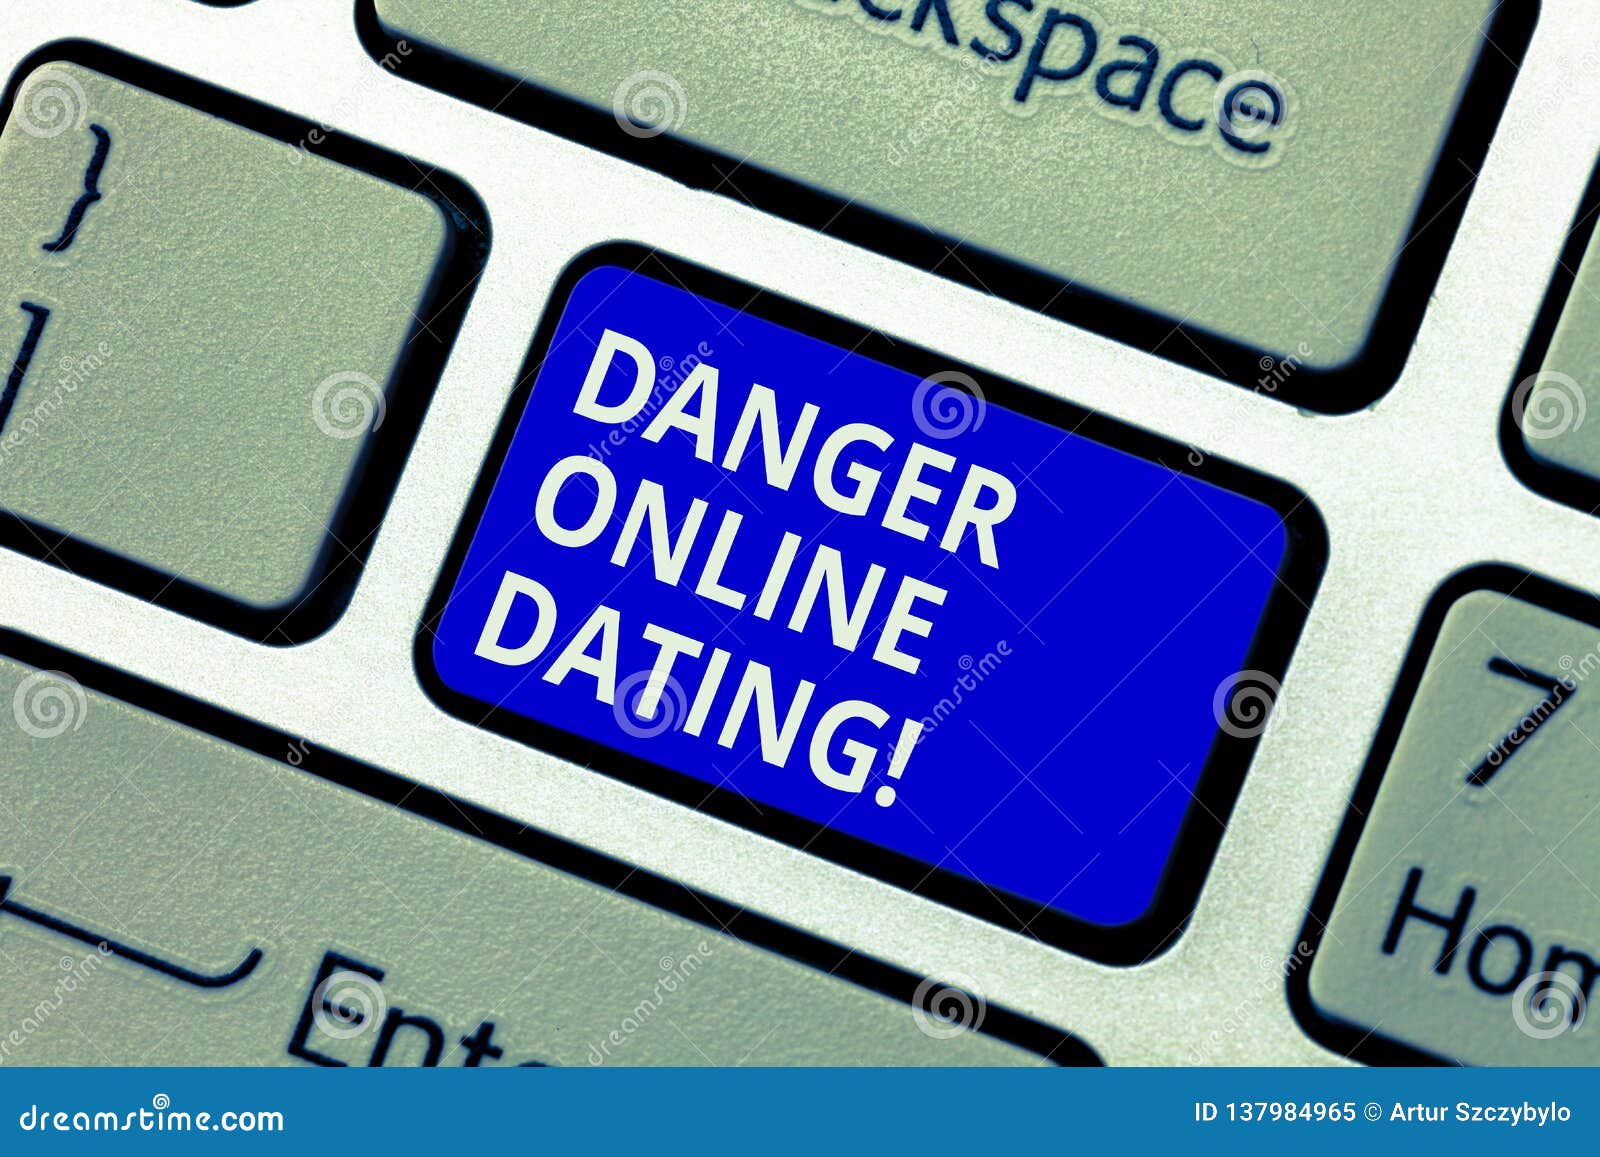 how online dating is impacting the lives of the present generation